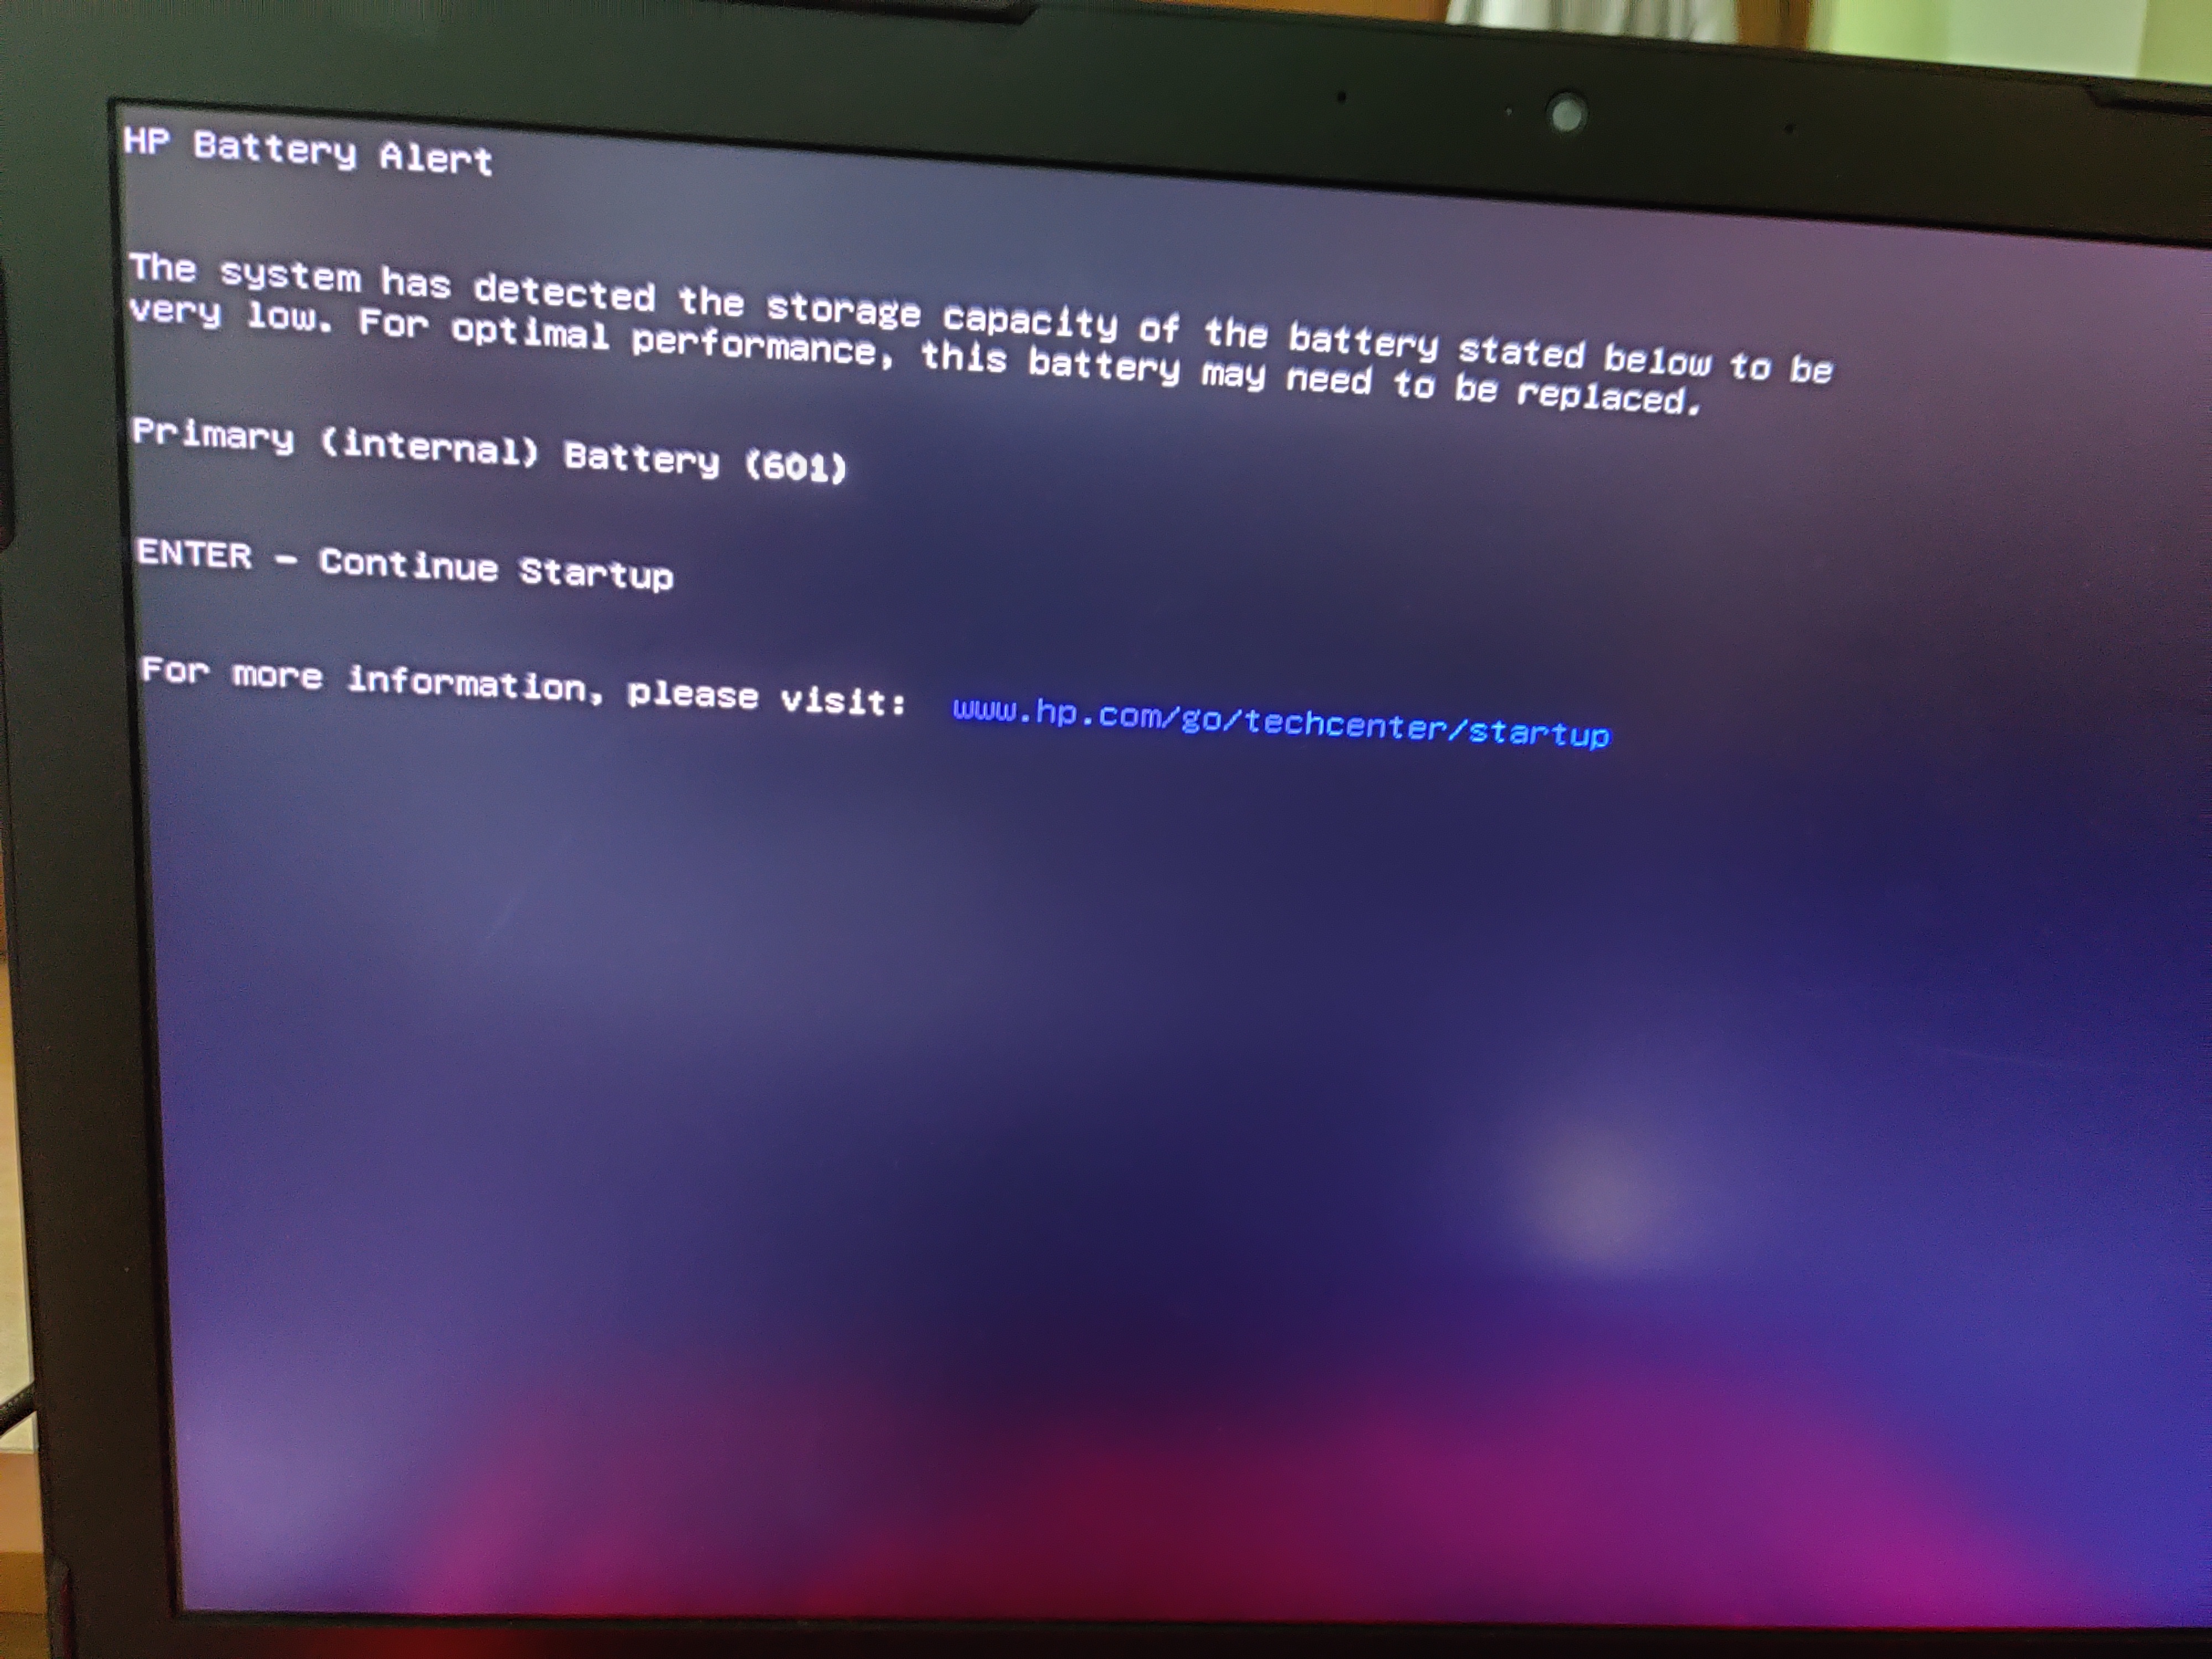 Every time i turn on my laptop it shows me a battery alert - HP Support  Community - 7654358